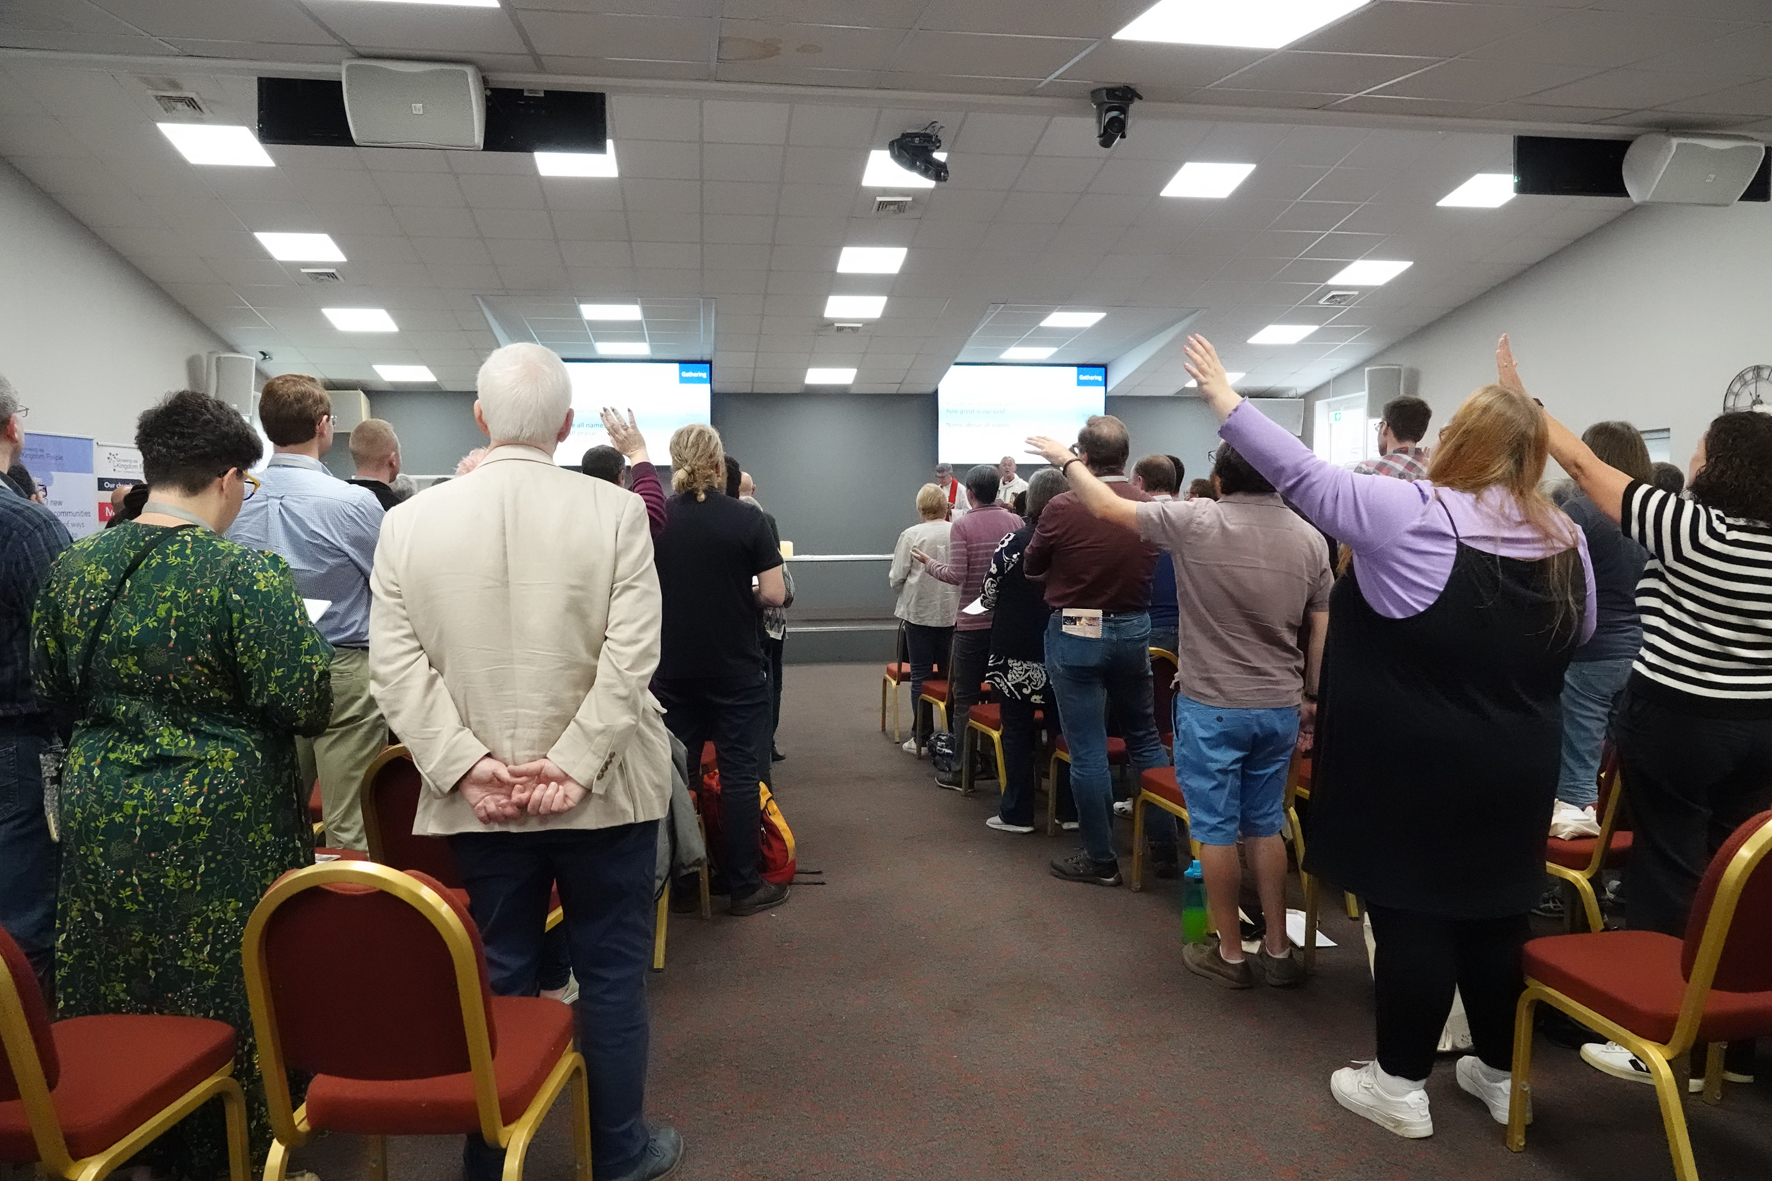 Backs of clergy heads as they worship together at their conference